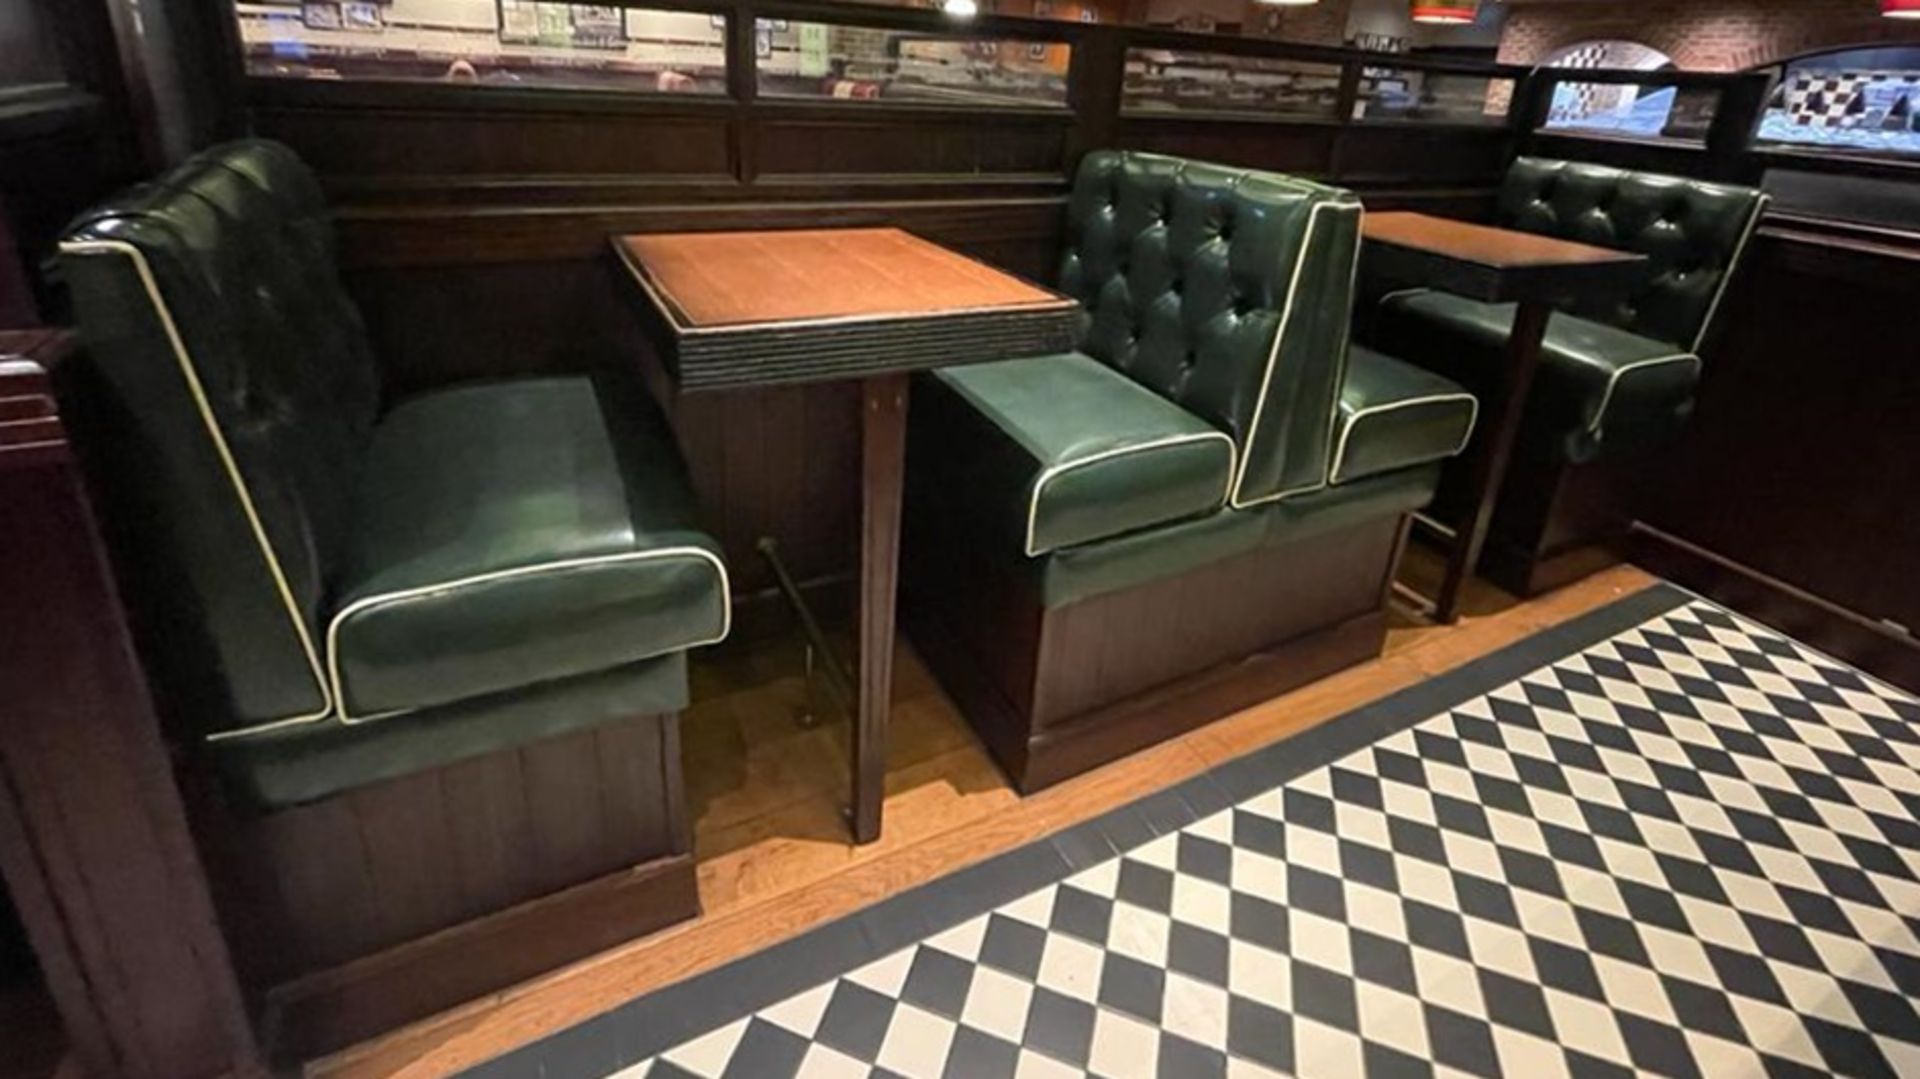 Selection of Single Seating Benches and Dining Tables to Seat Upto 6 Persons - Retro 1950's American - Image 2 of 2